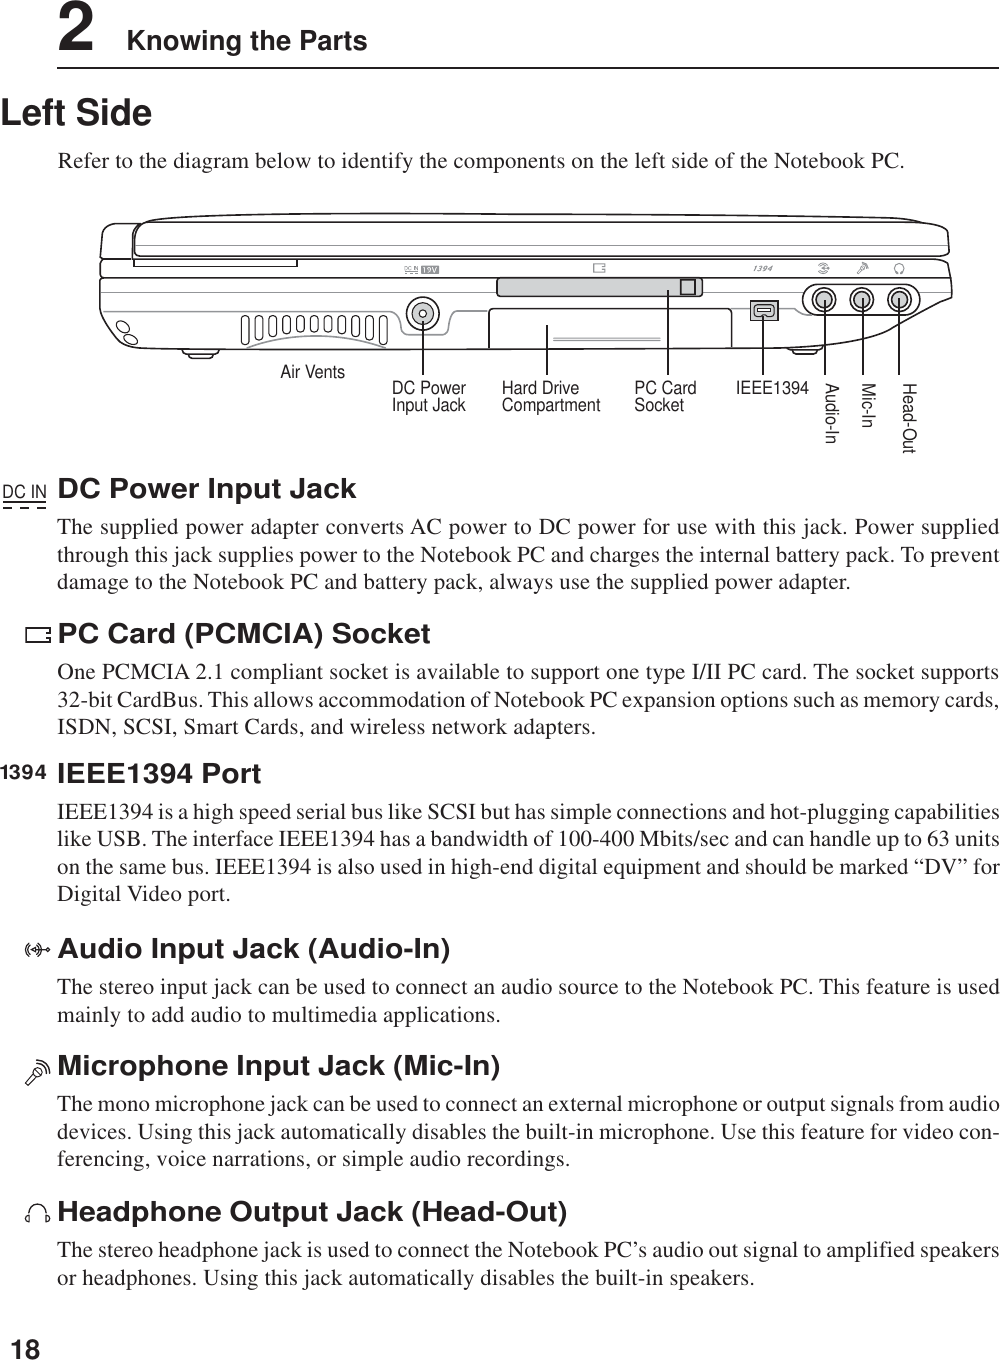 182    Knowing the PartsLeft SideRefer to the diagram below to identify the components on the left side of the Notebook PC.Air Vents IEEE1394PC CardSocketDC PowerInput JackMic-InHead-OutHard DriveCompartmentAudio-InMicrophone Input Jack (Mic-In)The mono microphone jack can be used to connect an external microphone or output signals from audiodevices. Using this jack automatically disables the built-in microphone. Use this feature for video con-ferencing, voice narrations, or simple audio recordings.Headphone Output Jack (Head-Out)The stereo headphone jack is used to connect the Notebook PC’s audio out signal to amplified speakersor headphones. Using this jack automatically disables the built-in speakers.PC Card (PCMCIA) SocketOne PCMCIA 2.1 compliant socket is available to support one type I/II PC card. The socket supports32-bit CardBus. This allows accommodation of Notebook PC expansion options such as memory cards,ISDN, SCSI, Smart Cards, and wireless network adapters.1394IEEE1394 PortIEEE1394 is a high speed serial bus like SCSI but has simple connections and hot-plugging capabilitieslike USB. The interface IEEE1394 has a bandwidth of 100-400 Mbits/sec and can handle up to 63 unitson the same bus. IEEE1394 is also used in high-end digital equipment and should be marked “DV” forDigital Video port.Audio Input Jack (Audio-In)The stereo input jack can be used to connect an audio source to the Notebook PC. This feature is usedmainly to add audio to multimedia applications.DC INDC Power Input JackThe supplied power adapter converts AC power to DC power for use with this jack. Power suppliedthrough this jack supplies power to the Notebook PC and charges the internal battery pack. To preventdamage to the Notebook PC and battery pack, always use the supplied power adapter.